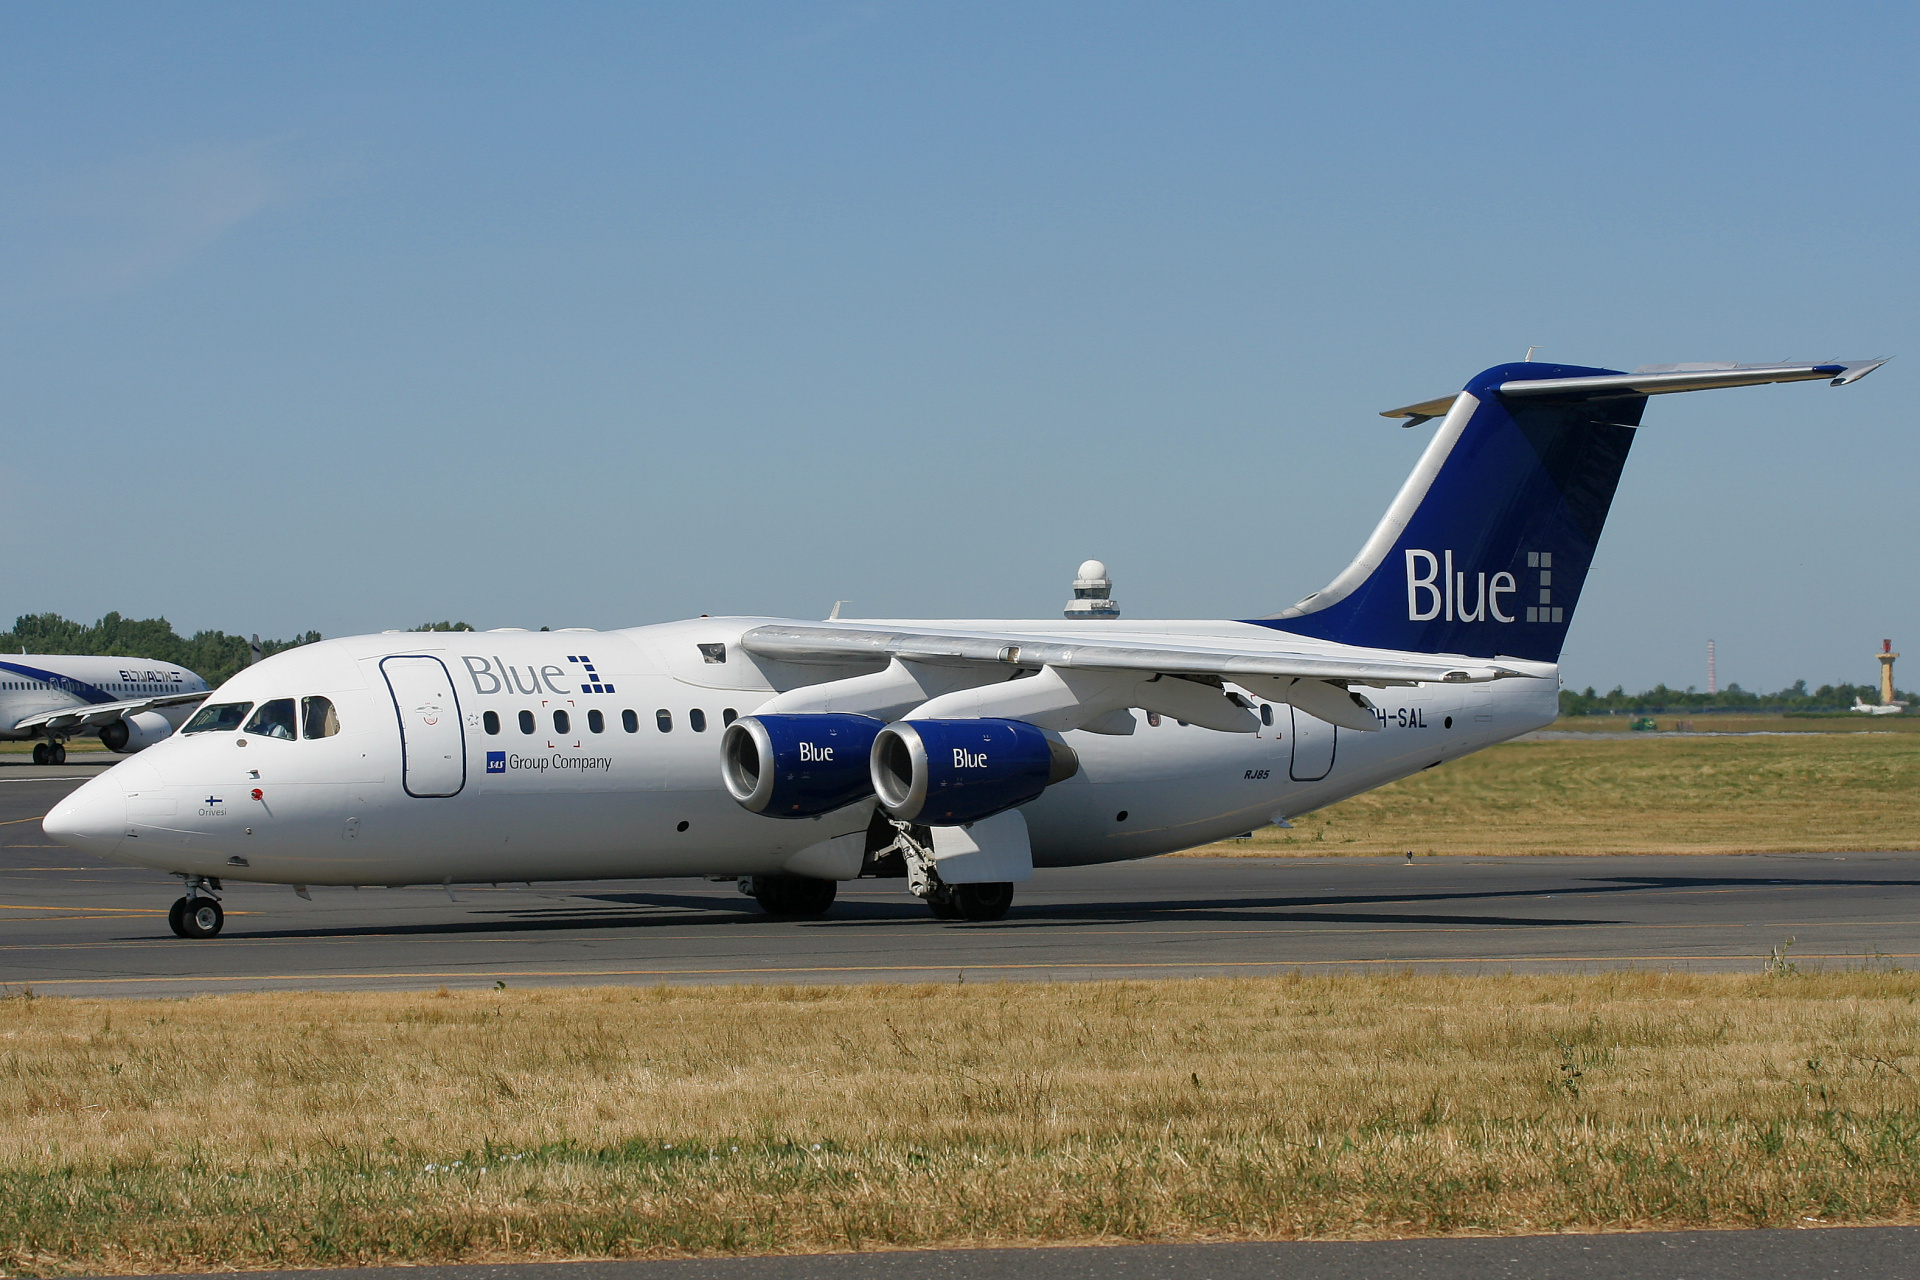 OH-SAL, Blue1 (Aircraft » EPWA Spotting » BAe 146 and revisions » Avro RJ85)